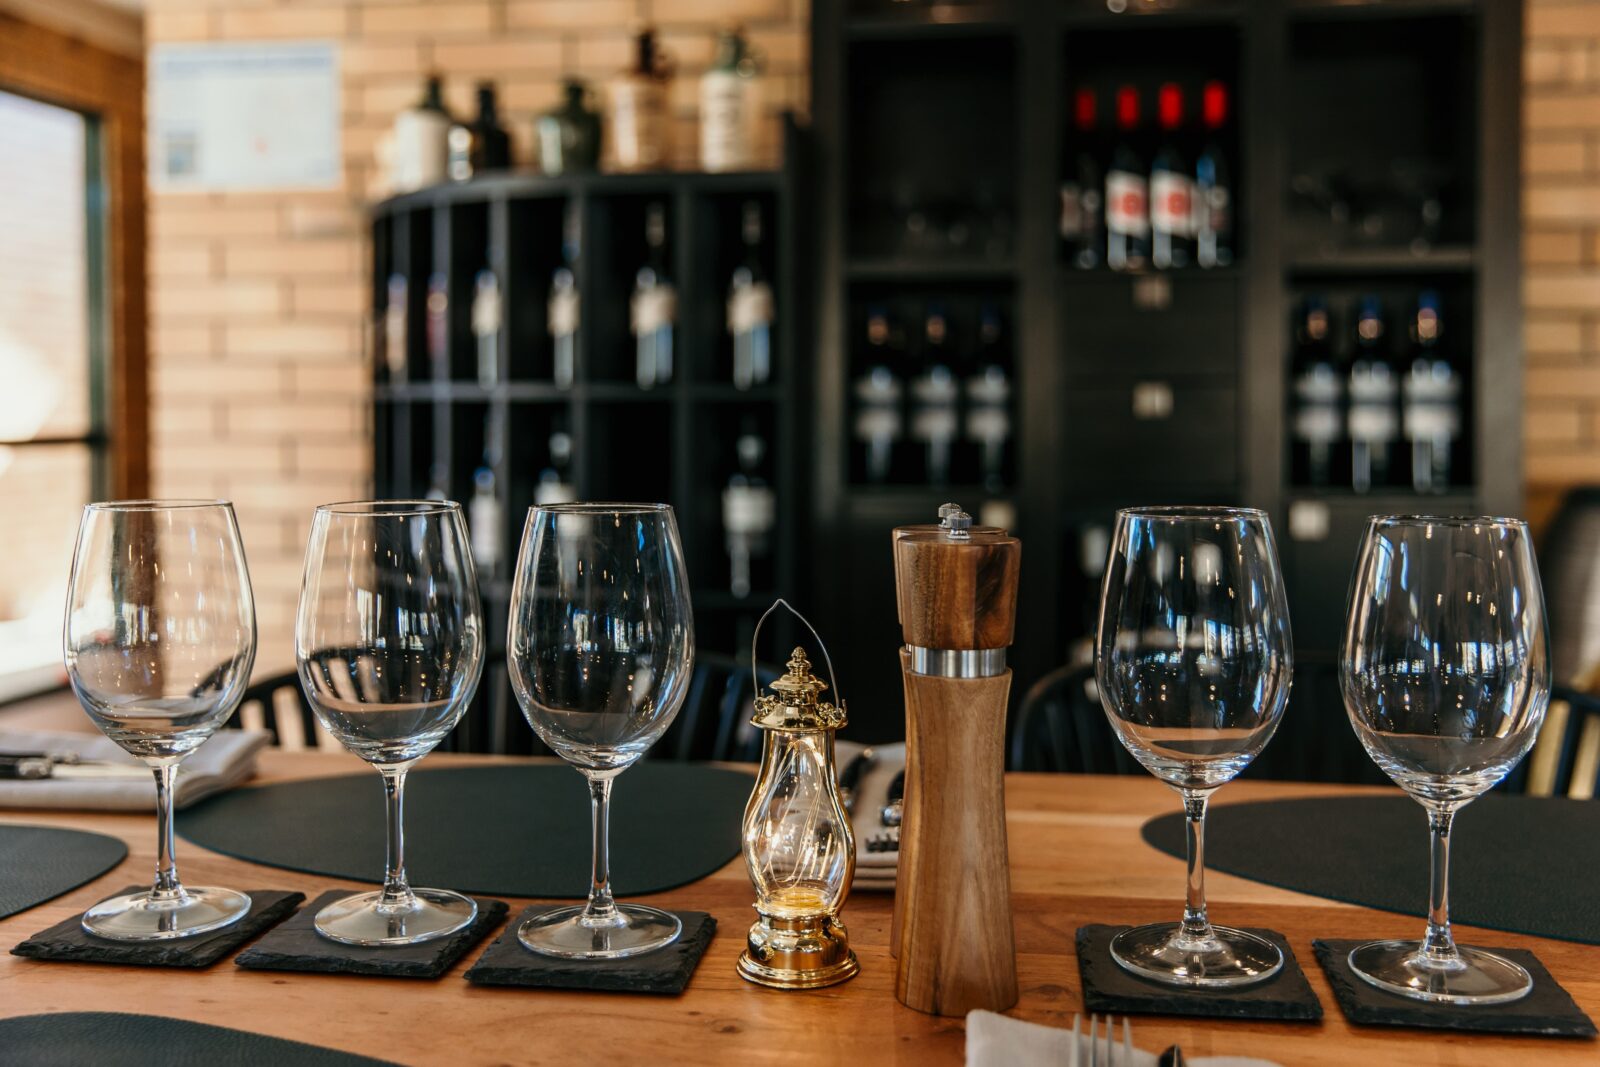 A set table in a restaurant with glassware, and a wine rack in the background.